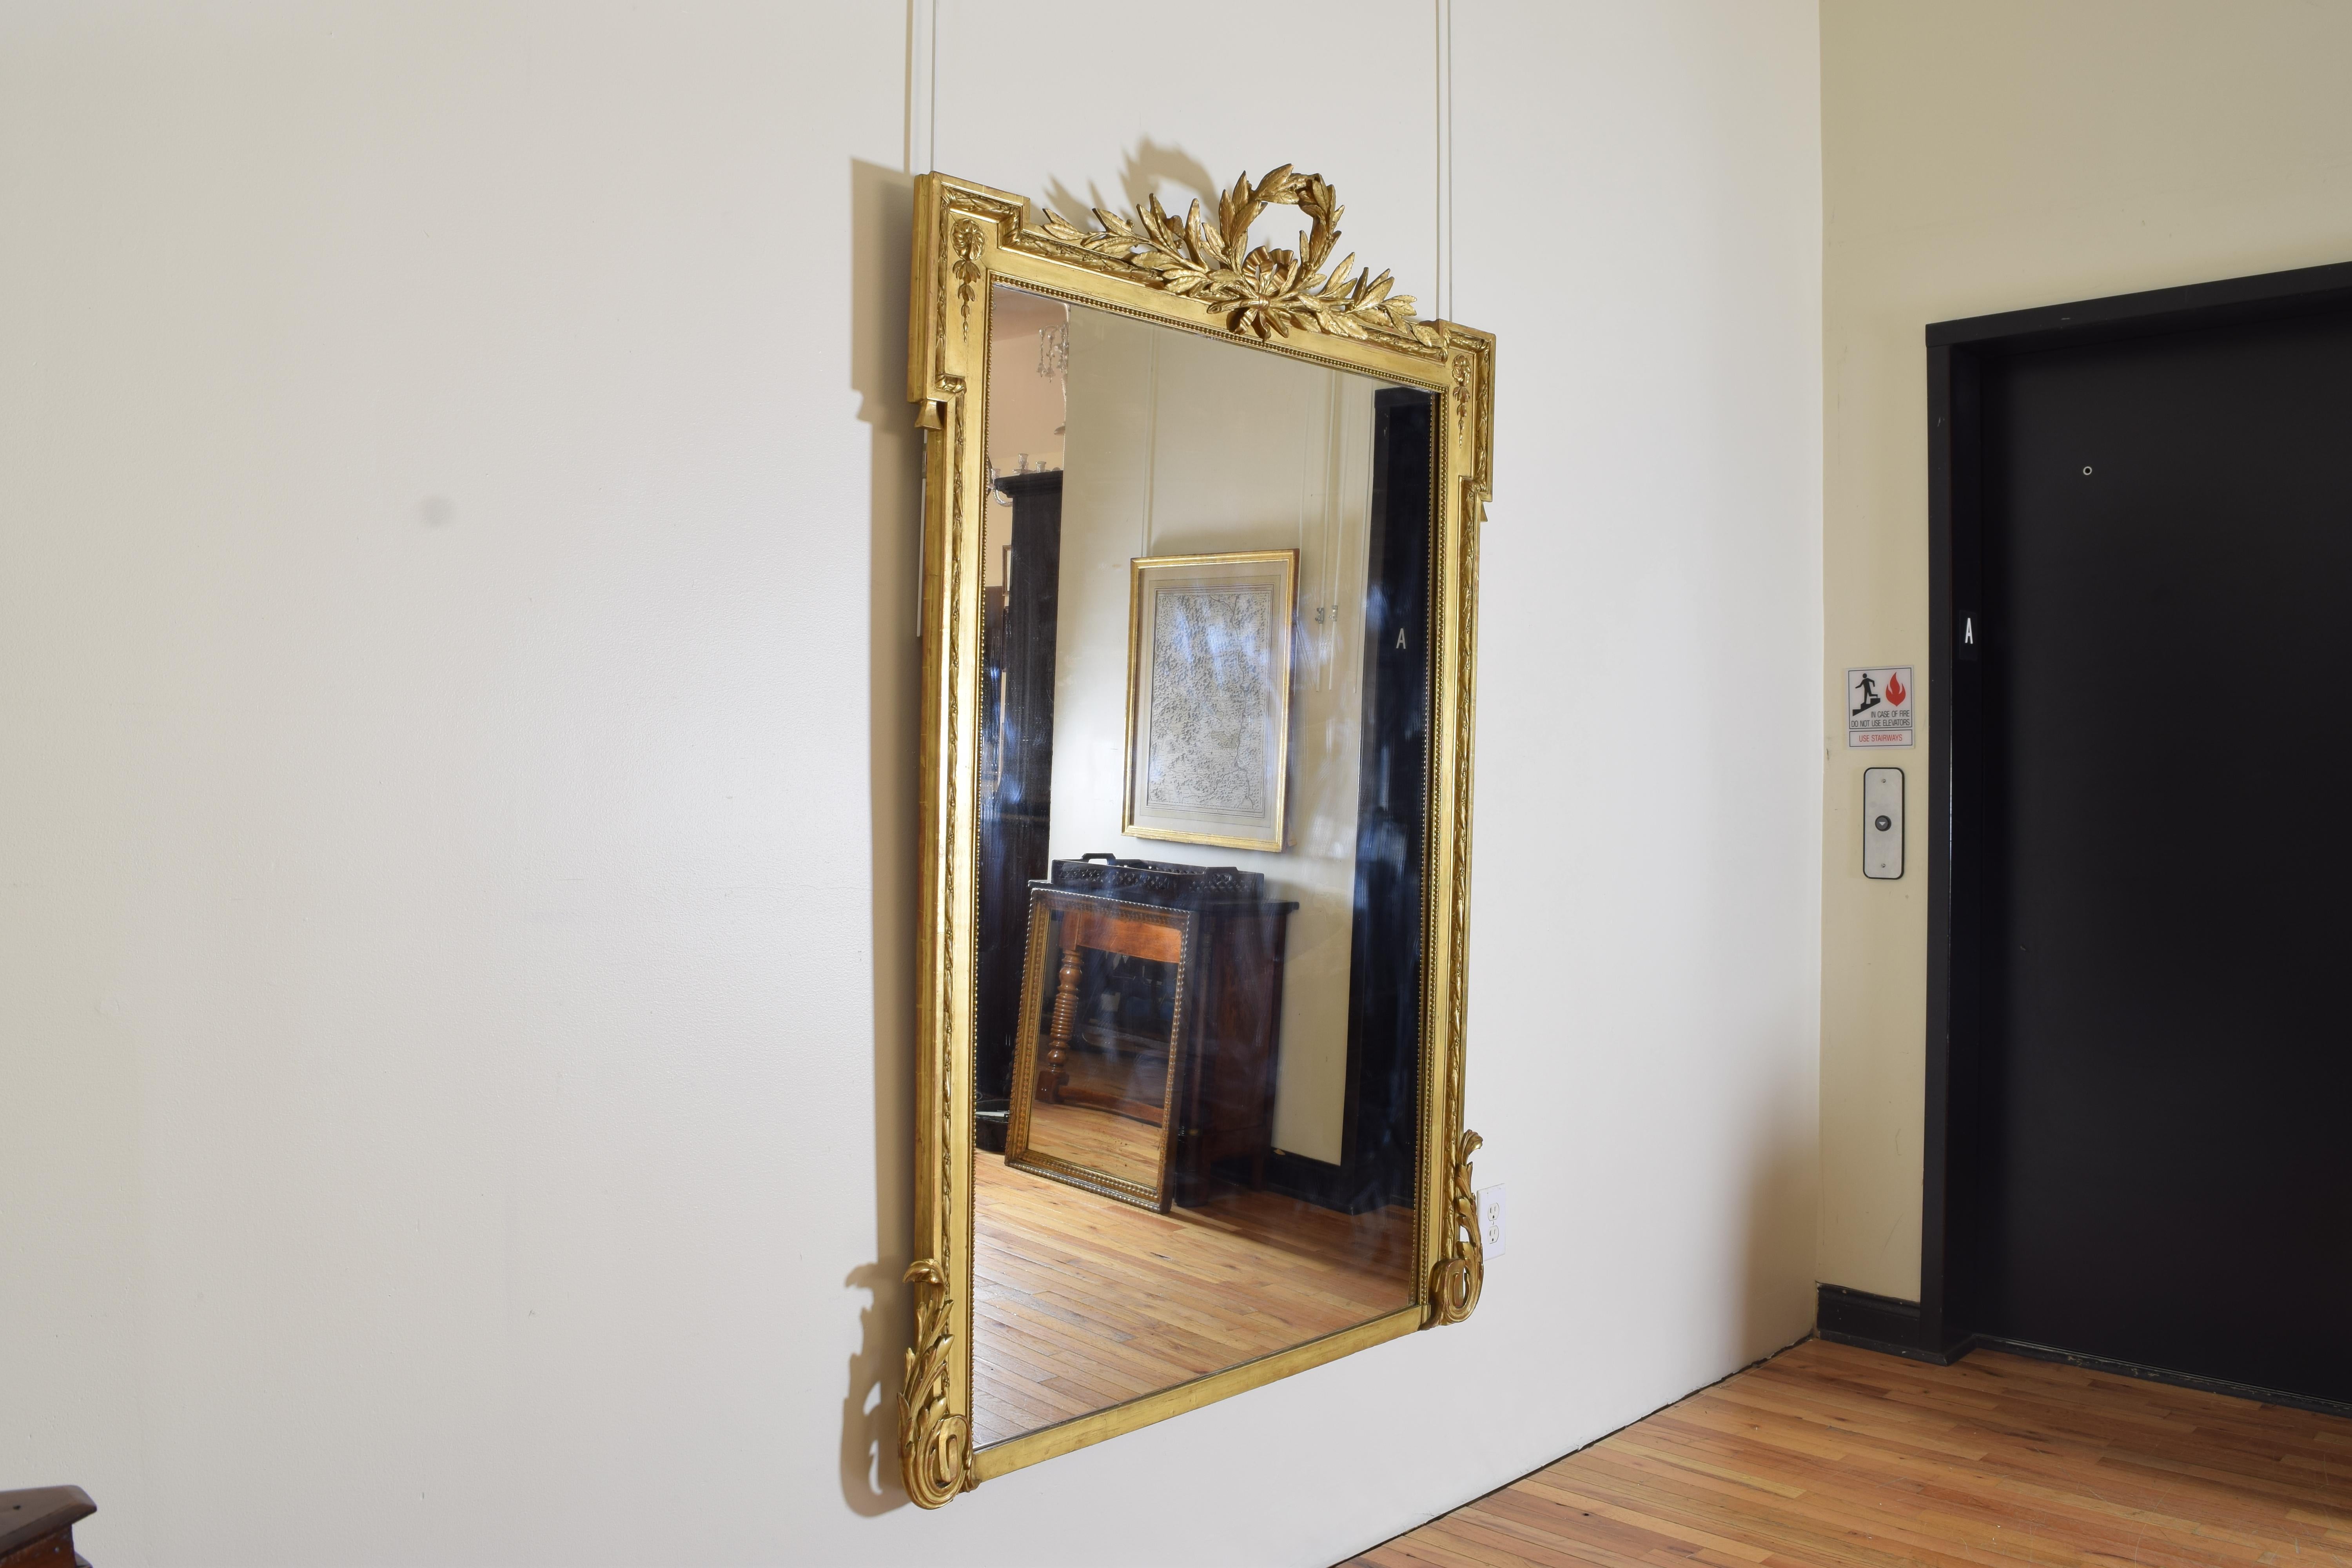 Neoclassical Revival French Neoclassic Large Carved Giltwood and Gilt-Gesso Mirror, 3rdq 19th Cen.